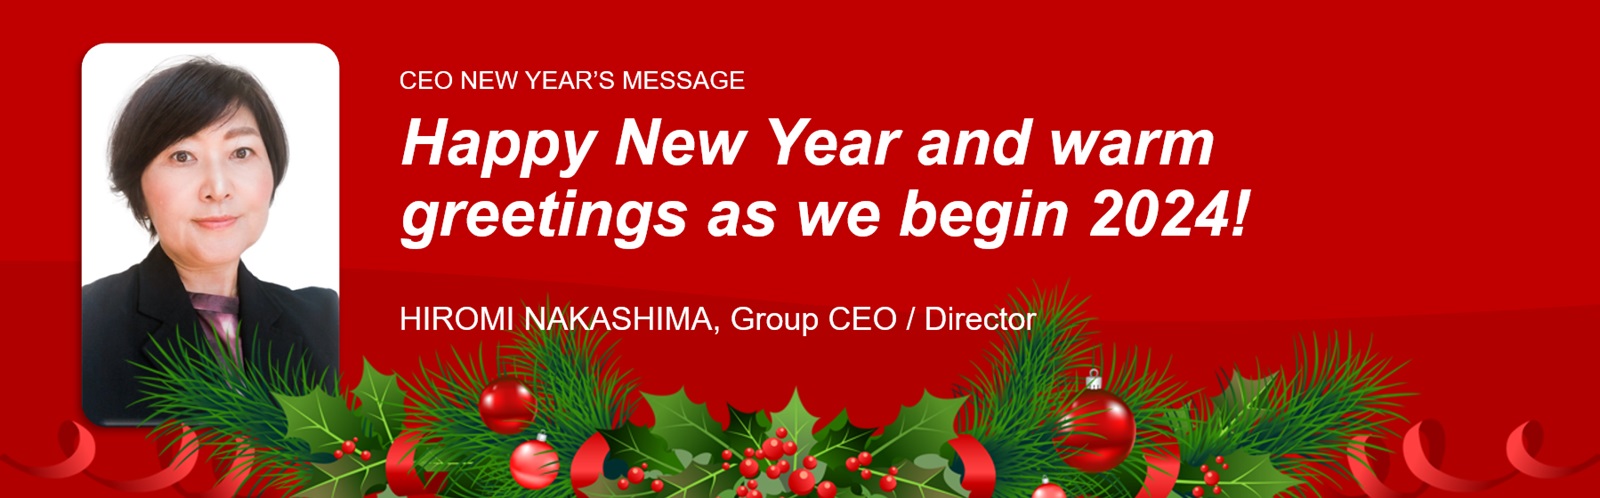 CEO New Year's Message 2024